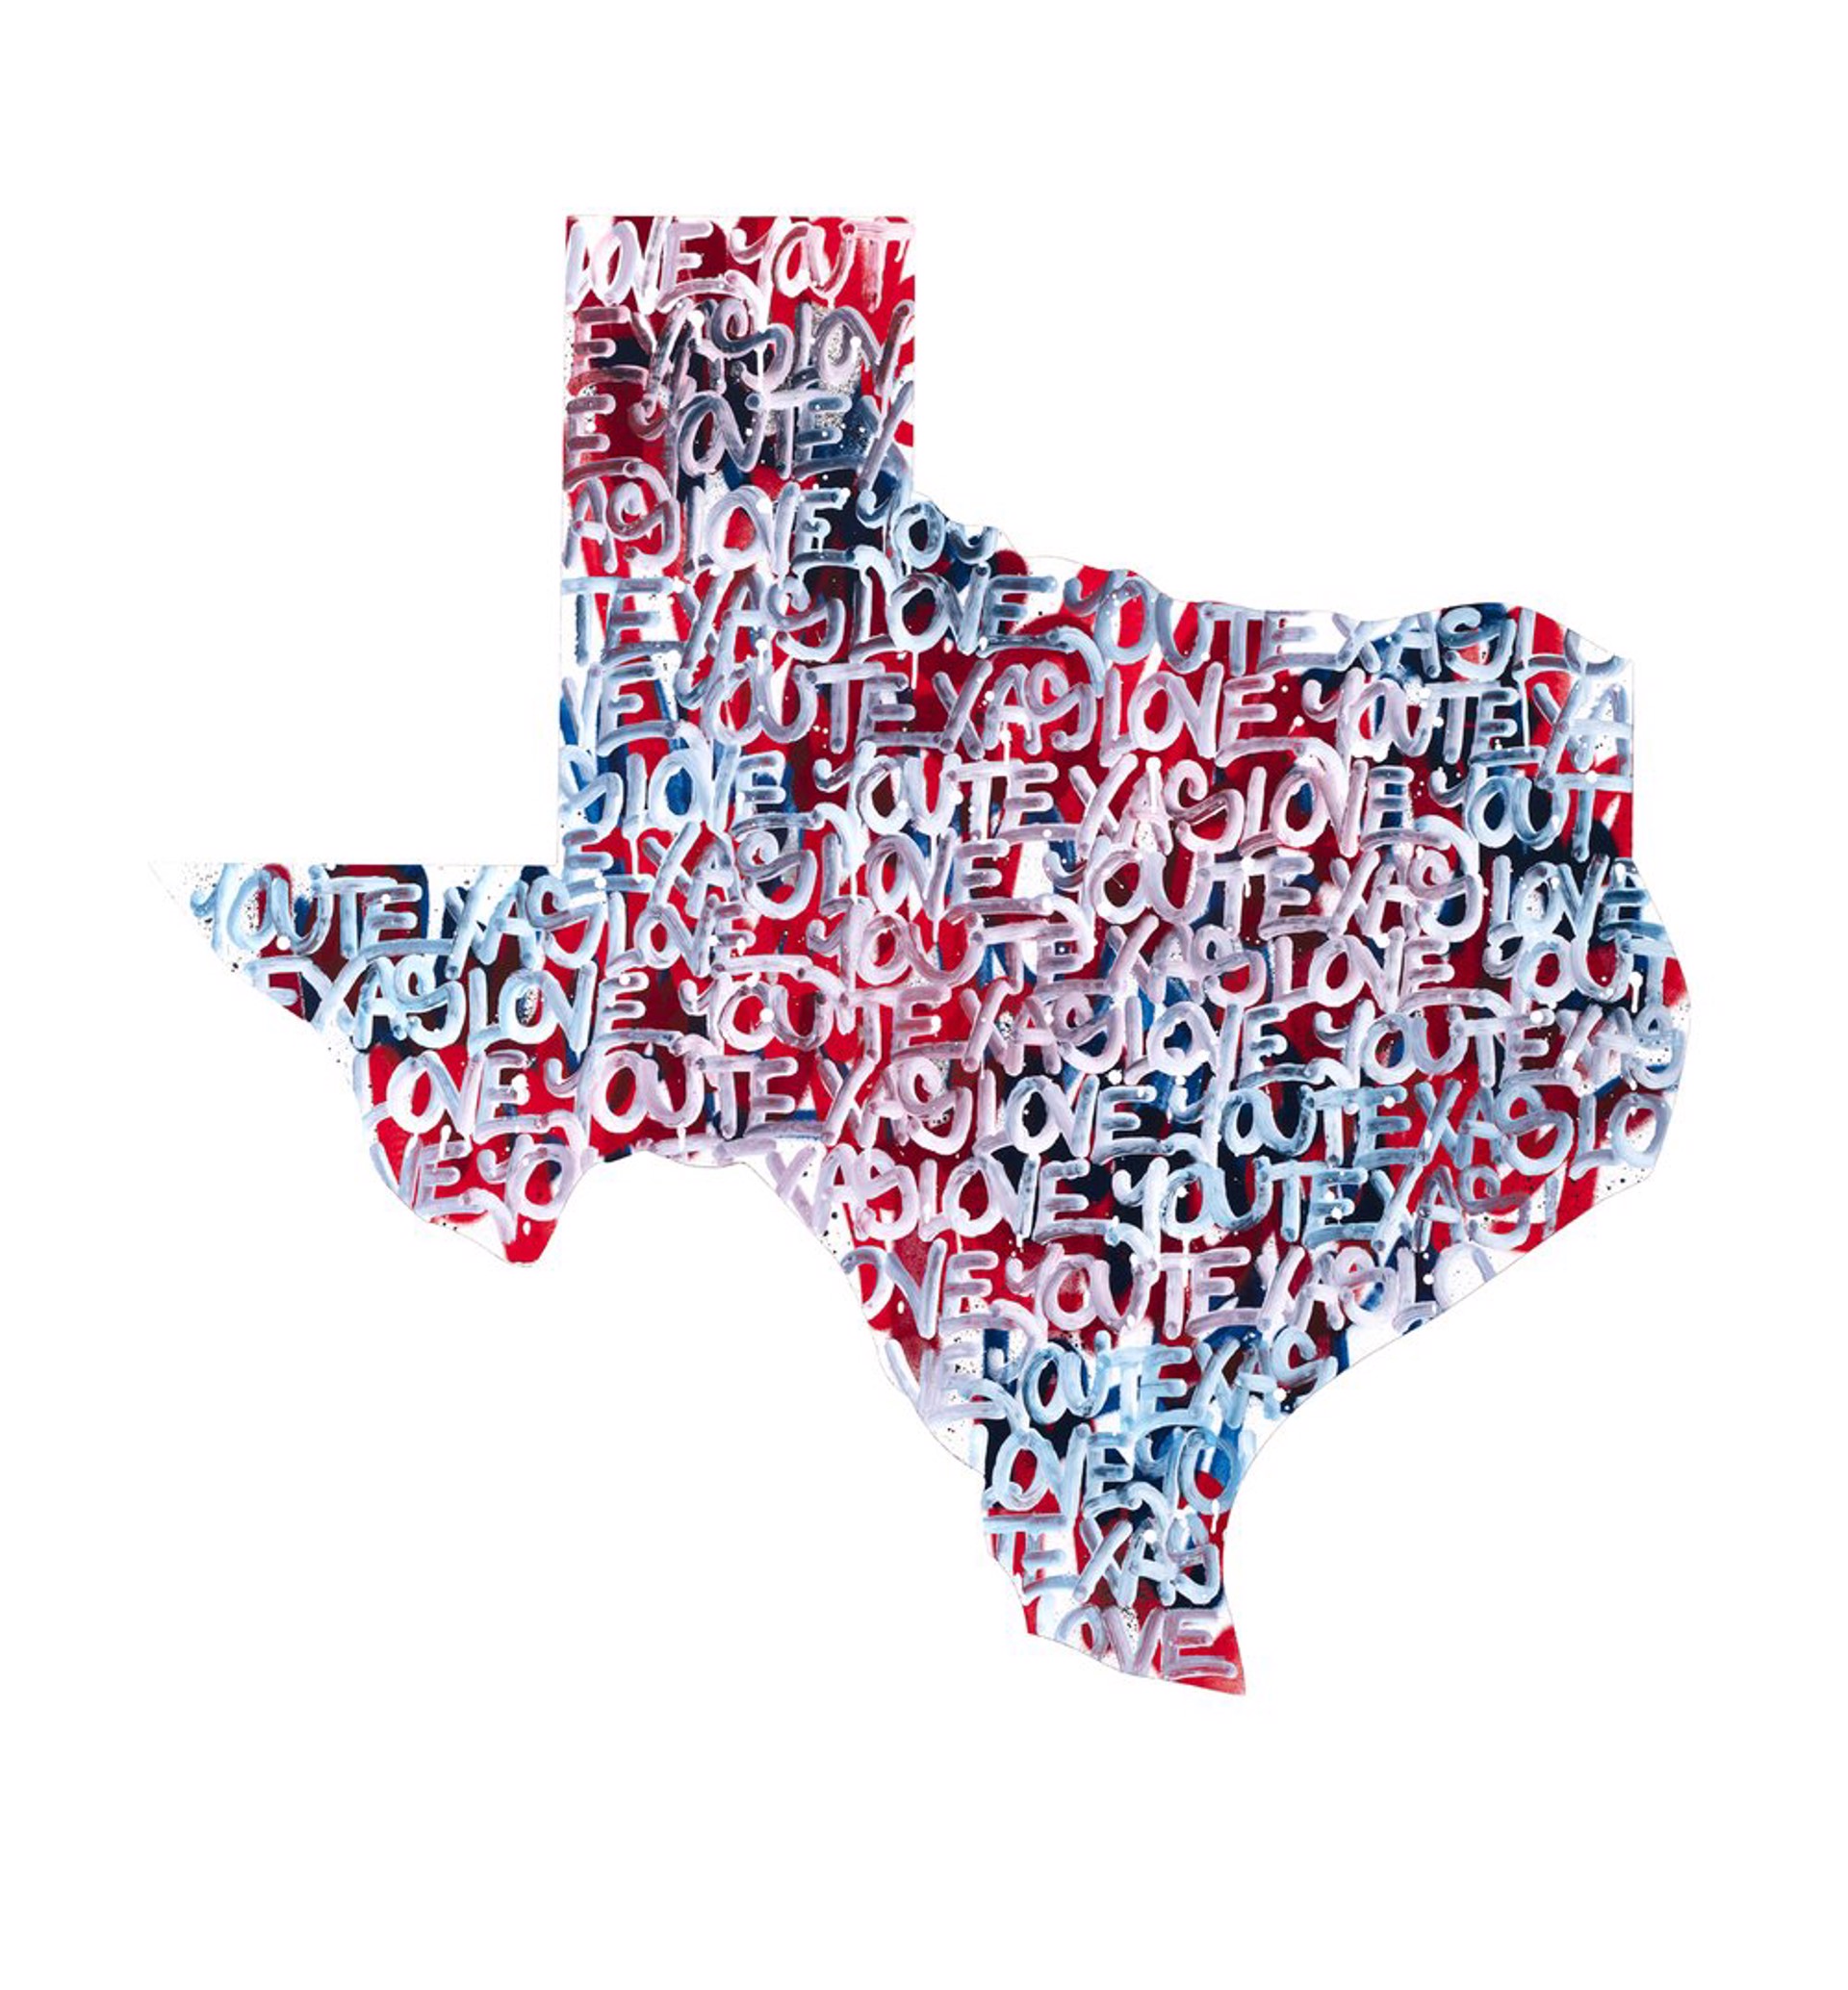 Texas Pride by Amber Goldhammer